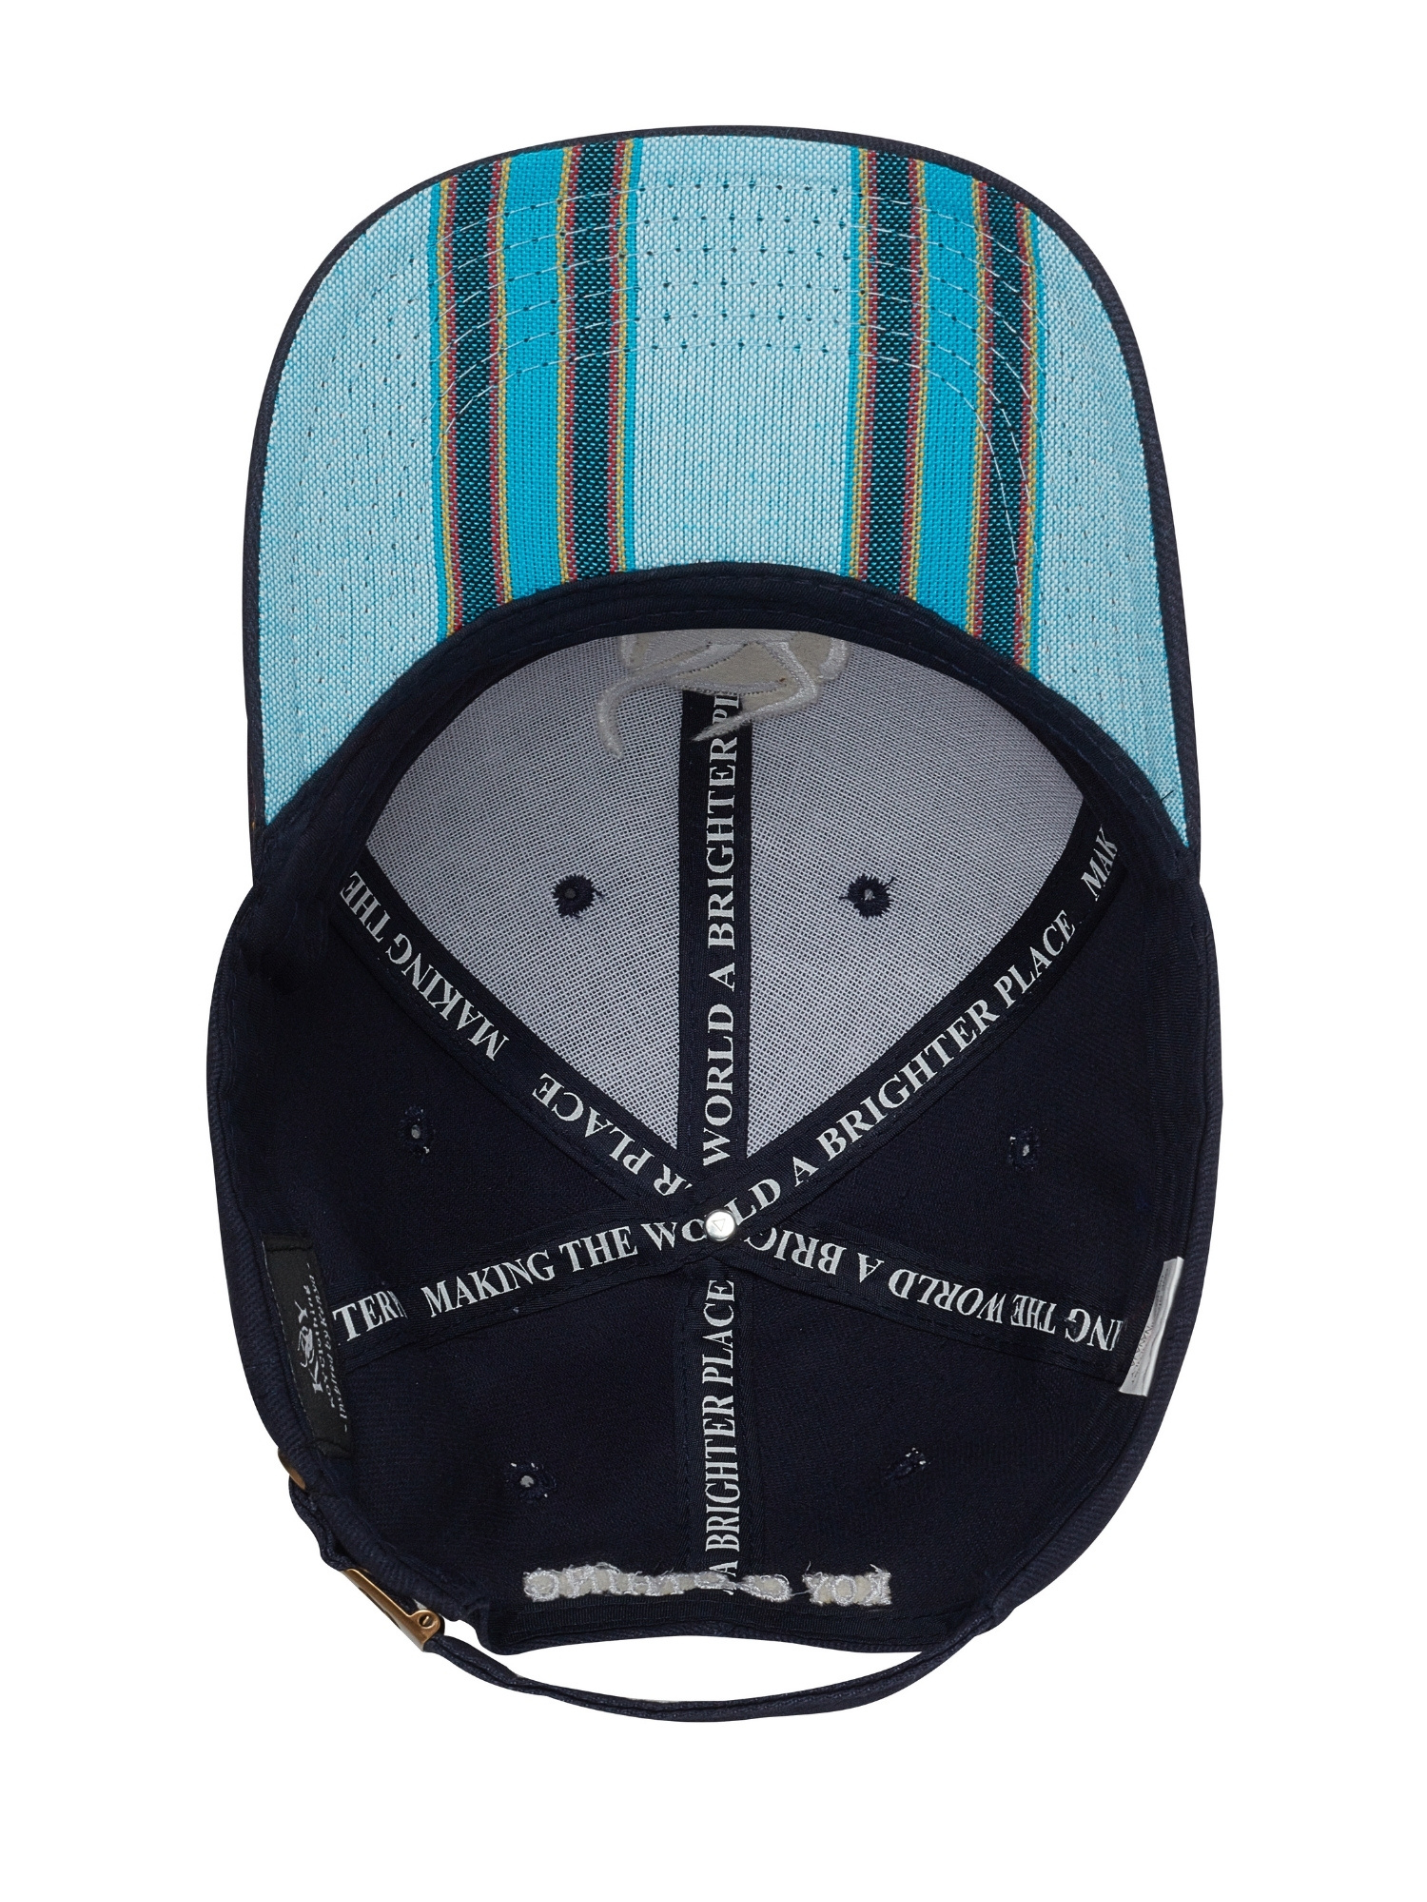 Navy Cotton Cap Turquoise-blue striped Kenyan Kikoy fabric detailing under the peak Traditional baseball style cap made from durable washed cotton twill Signature impala head logo embroidery and embossed buckle